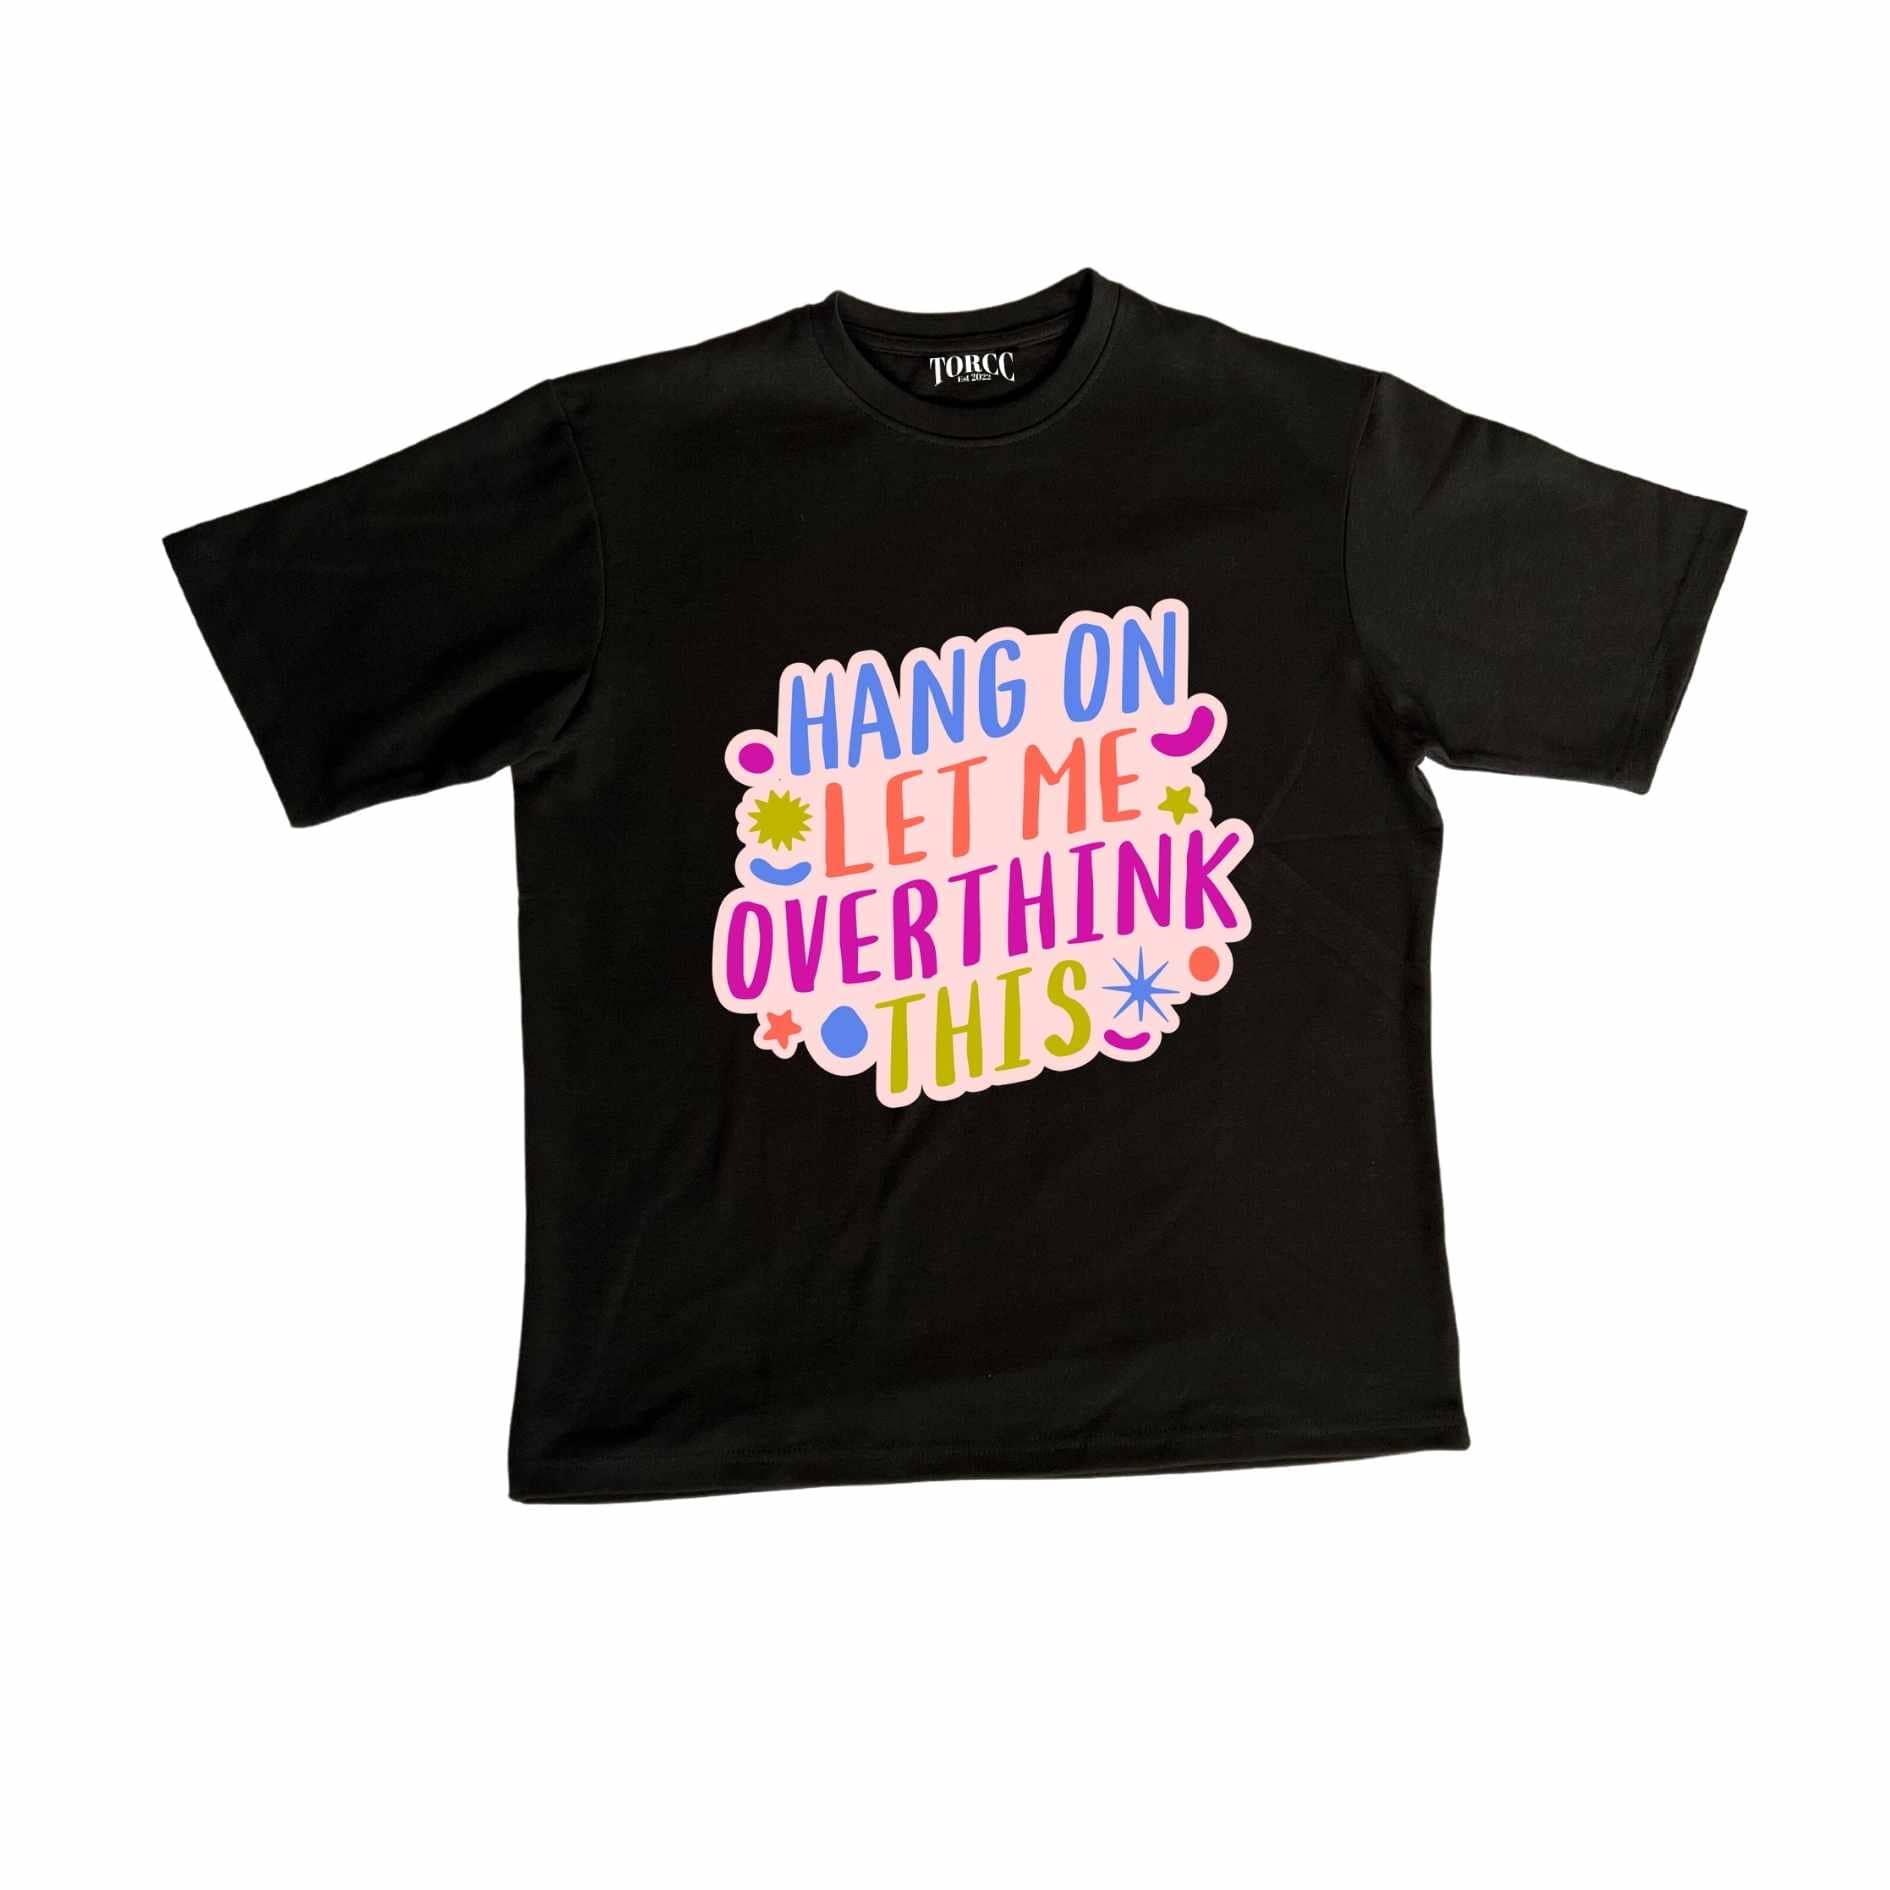 Let me overthink this : Oversized Graphic Tees